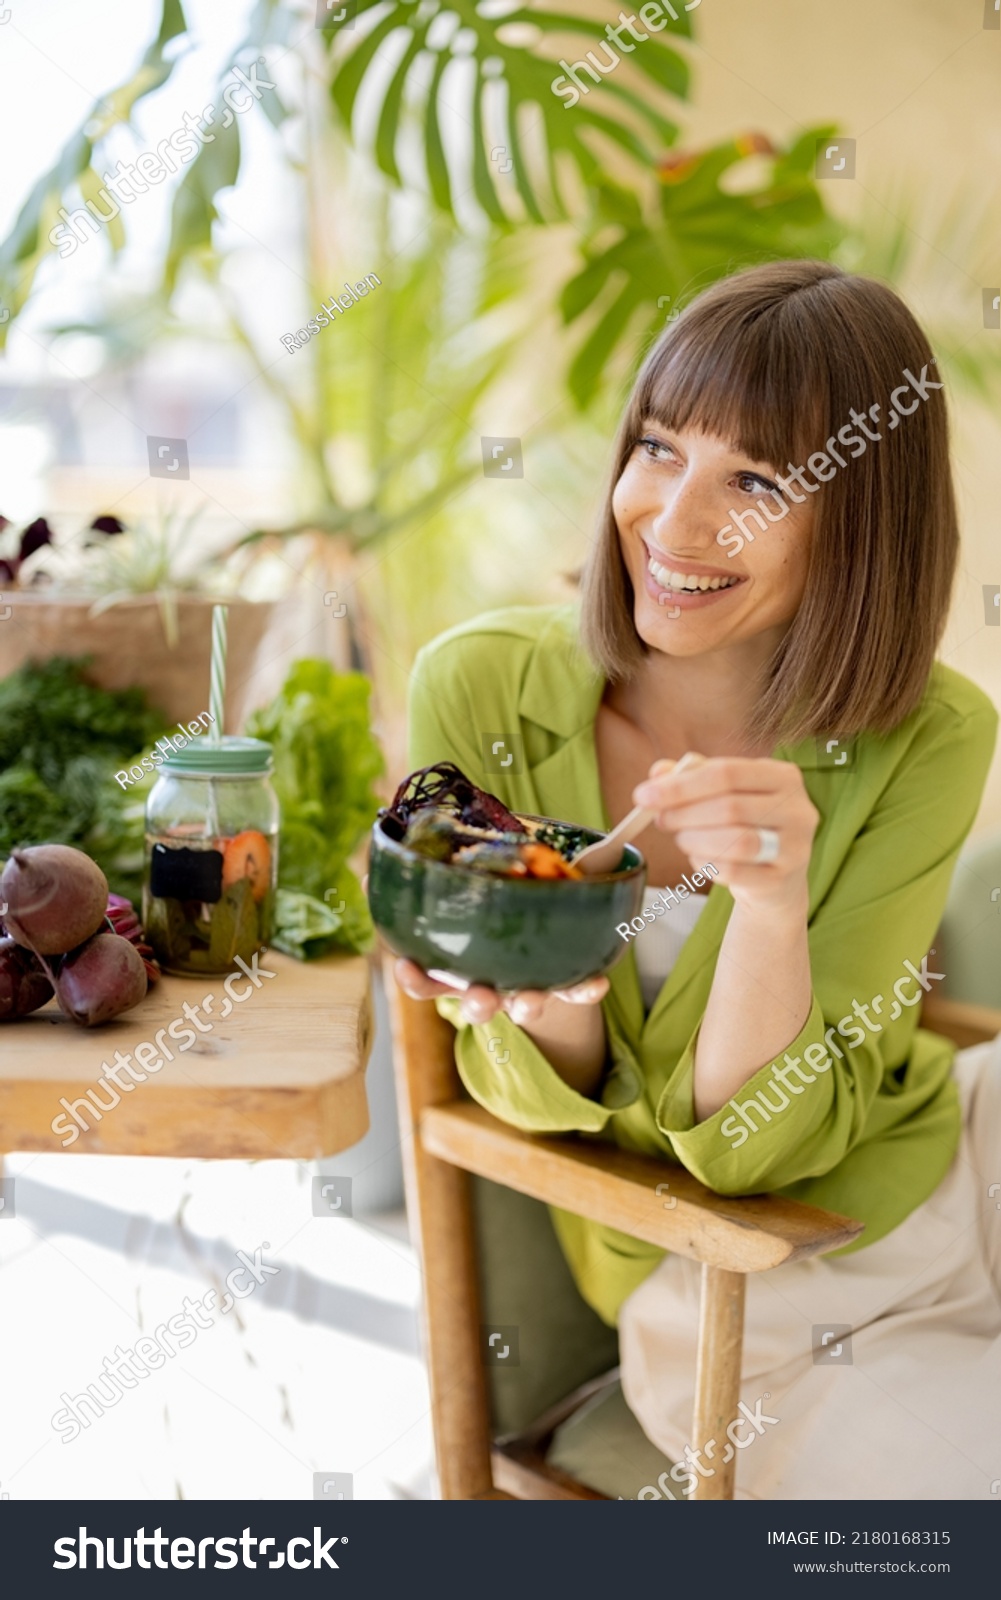 Young cheerful woman eats vegetarian lunch in bowl, sitting by the table full of fresh food ingredients indoors. Healthy lifestyle and wellness concept #2180168315